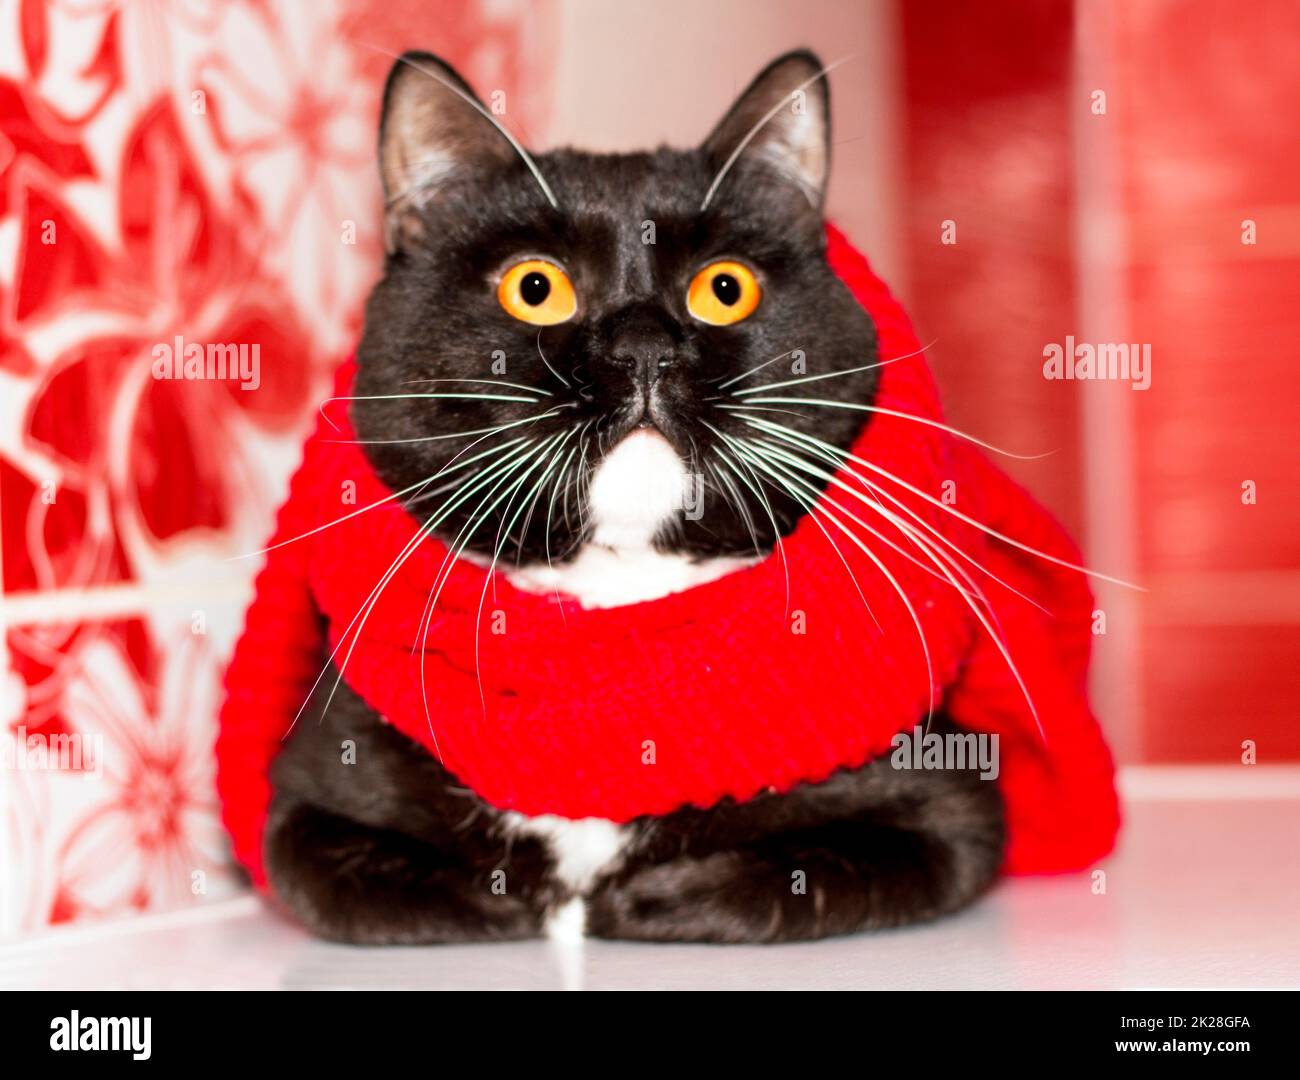 Powerful Scottish bicolor cat close-up basking in a red scarf, winter is cold Stock Photo